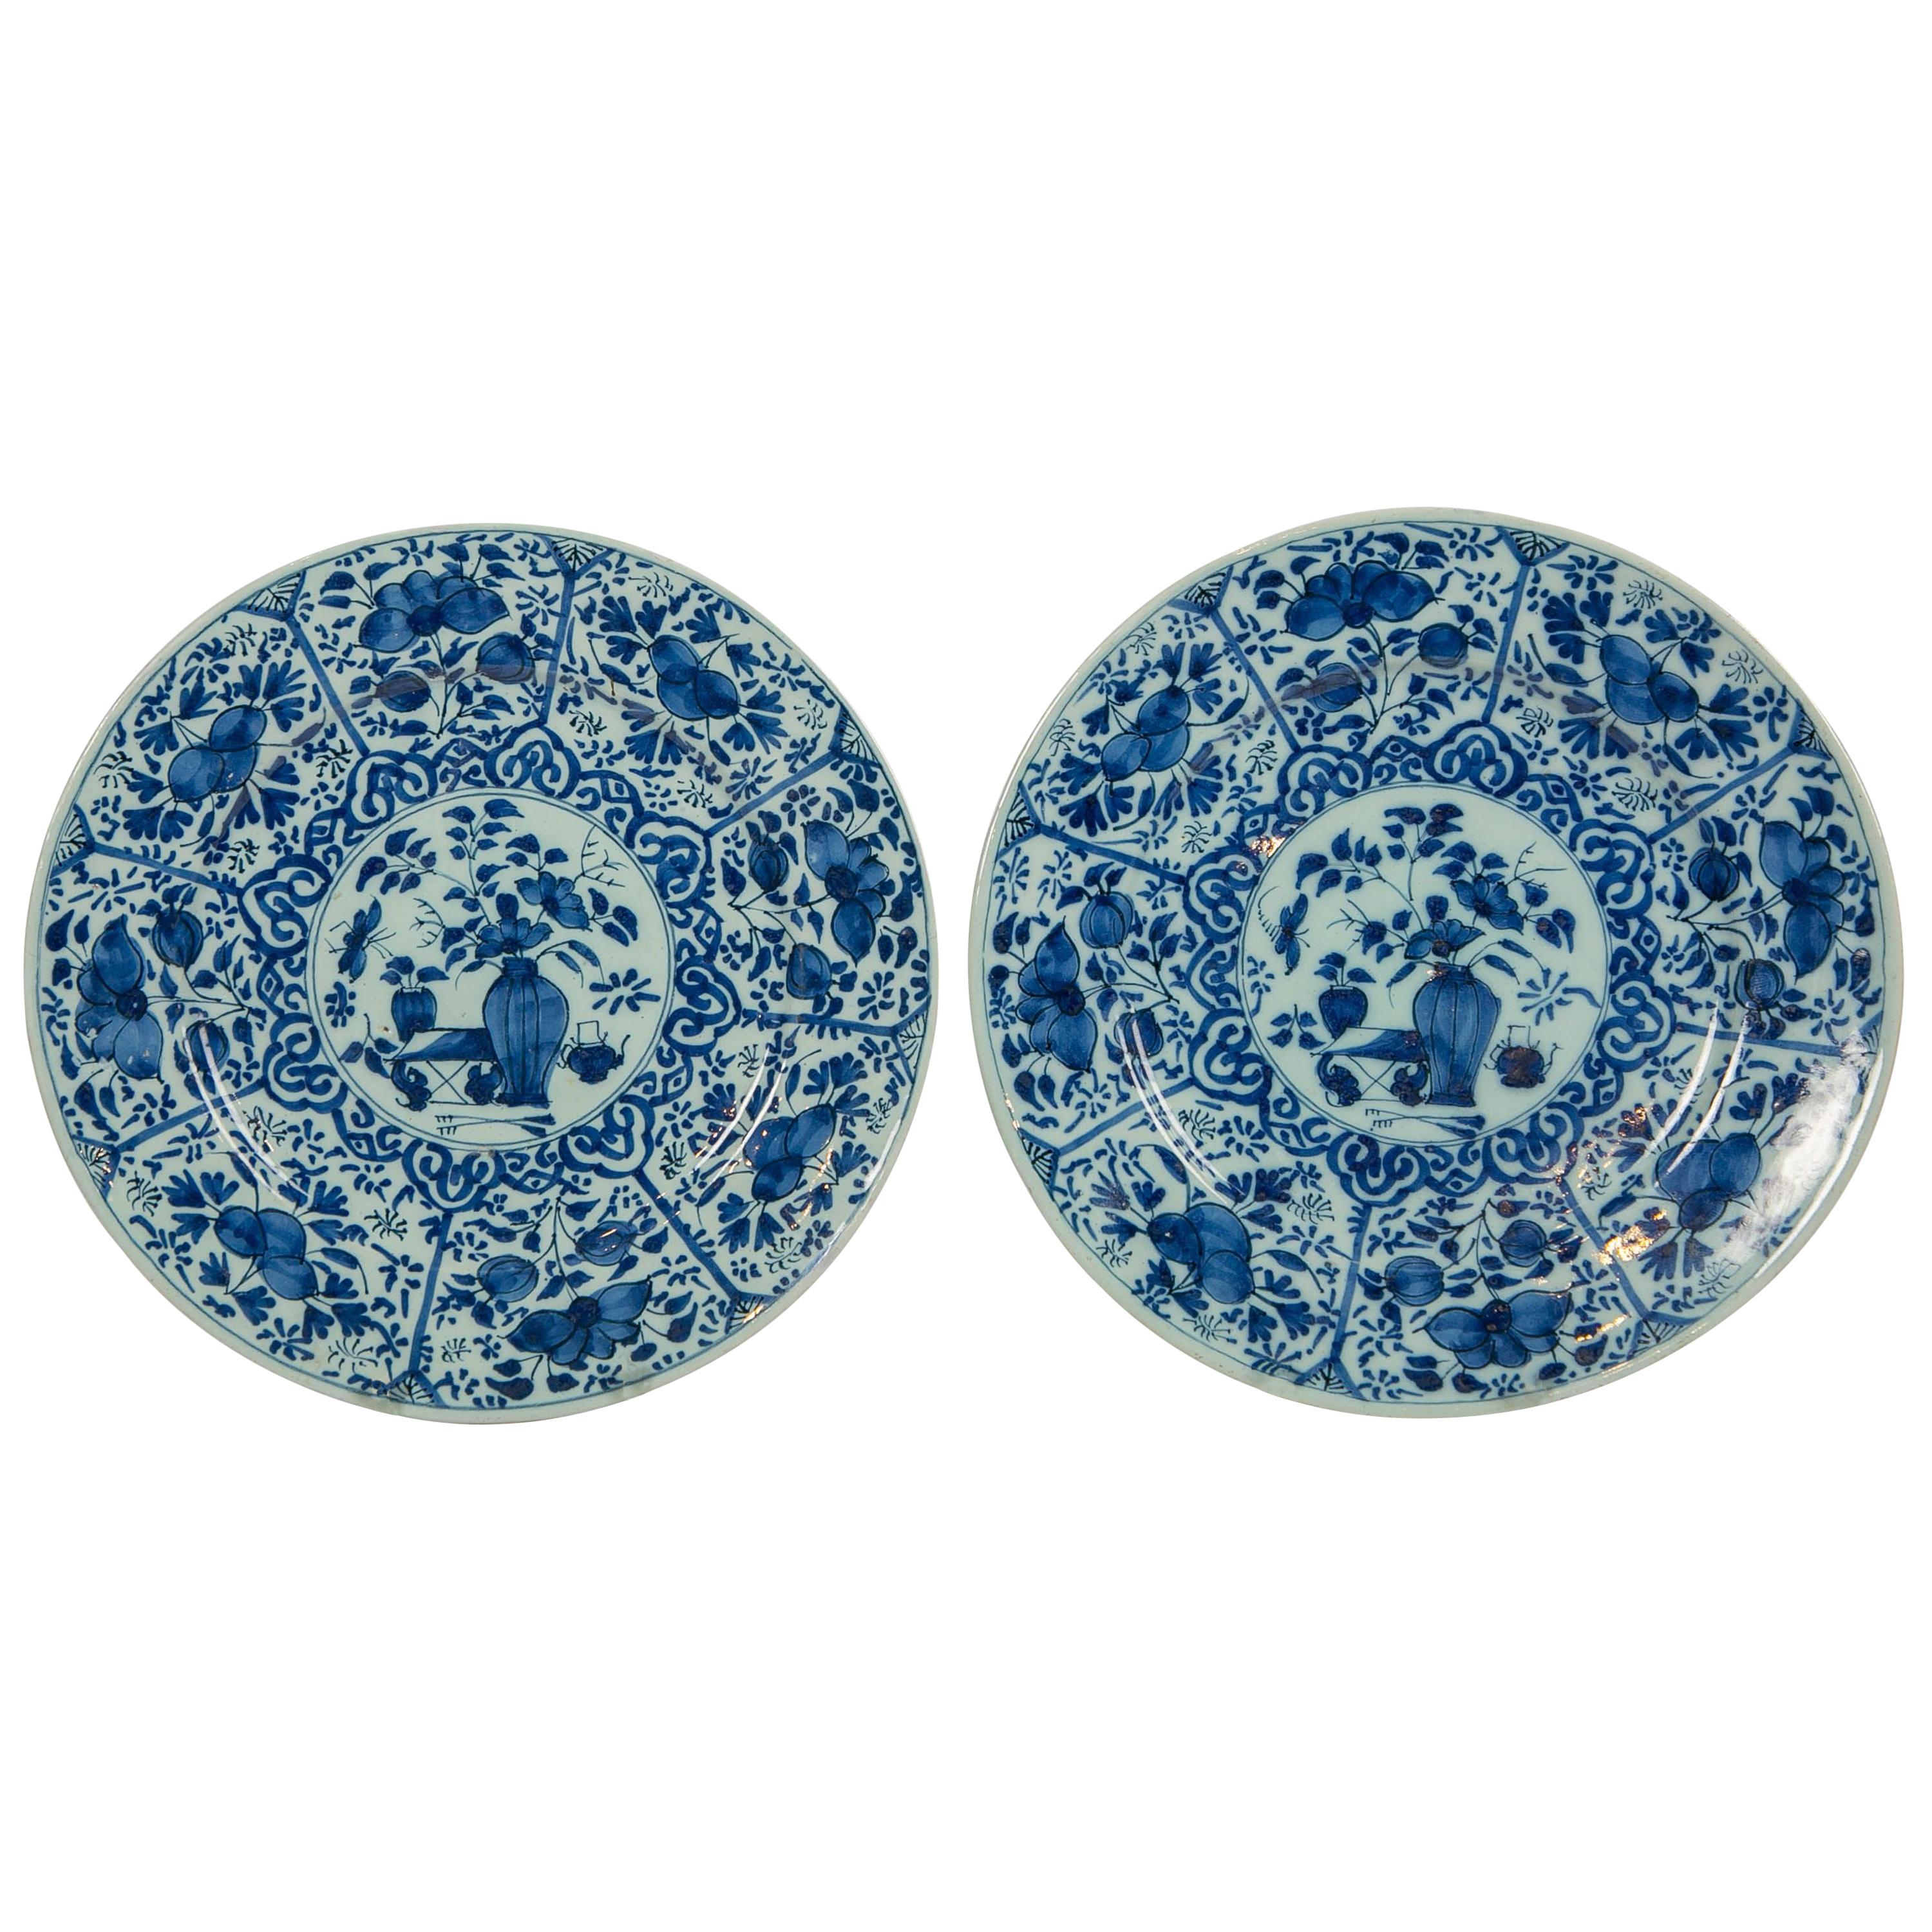 Pair of Dutch Delft Blue and White Pancake Plates Made 1705-1725